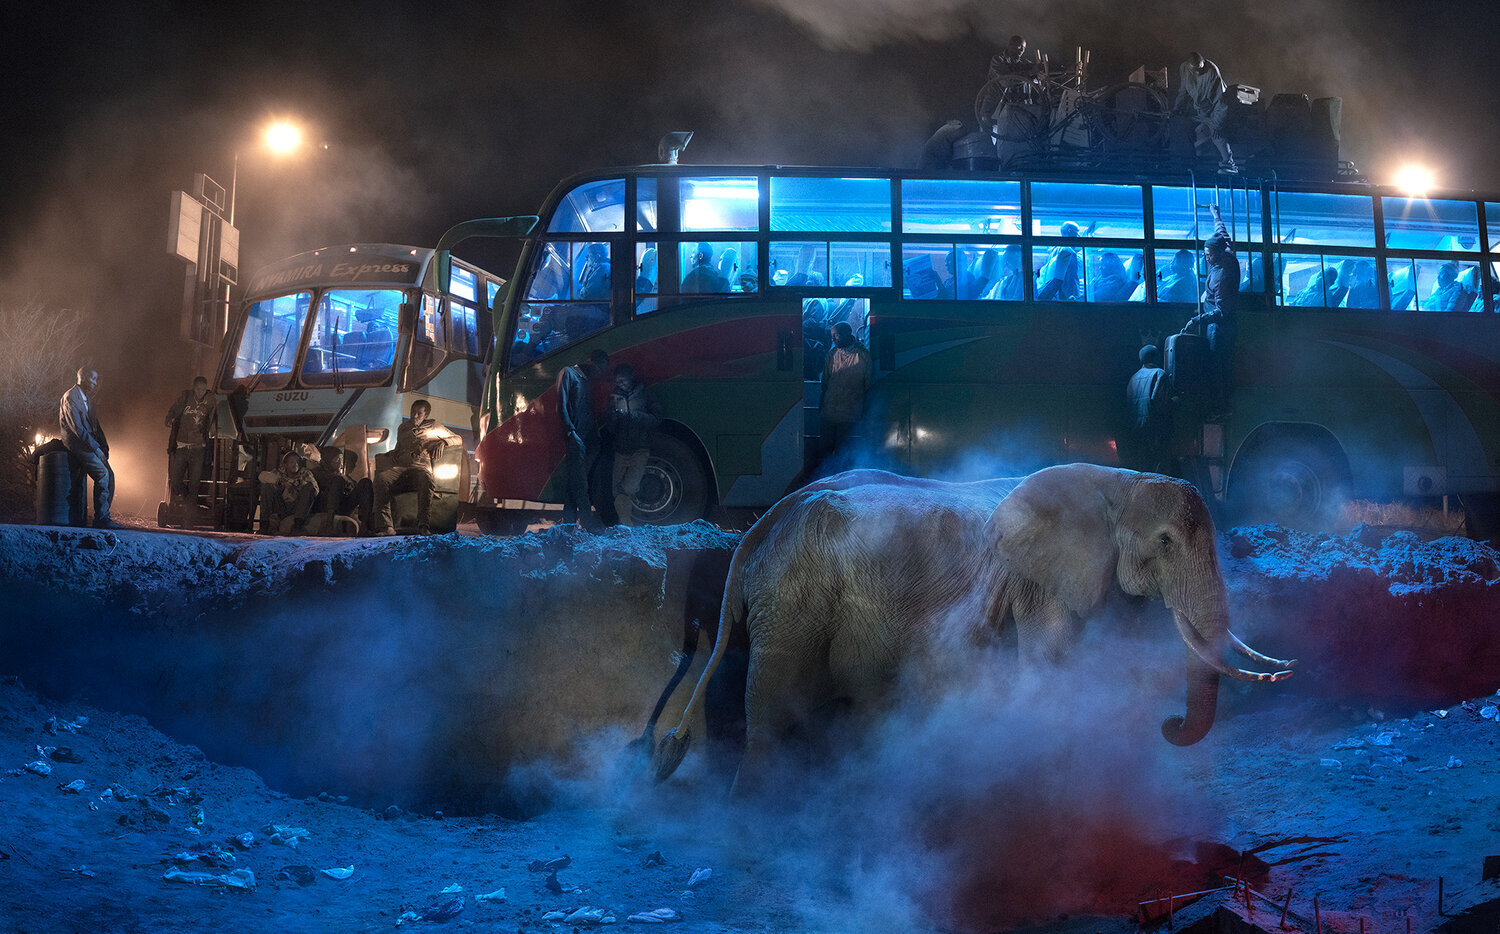  Bus Station with Elephant In Dust 